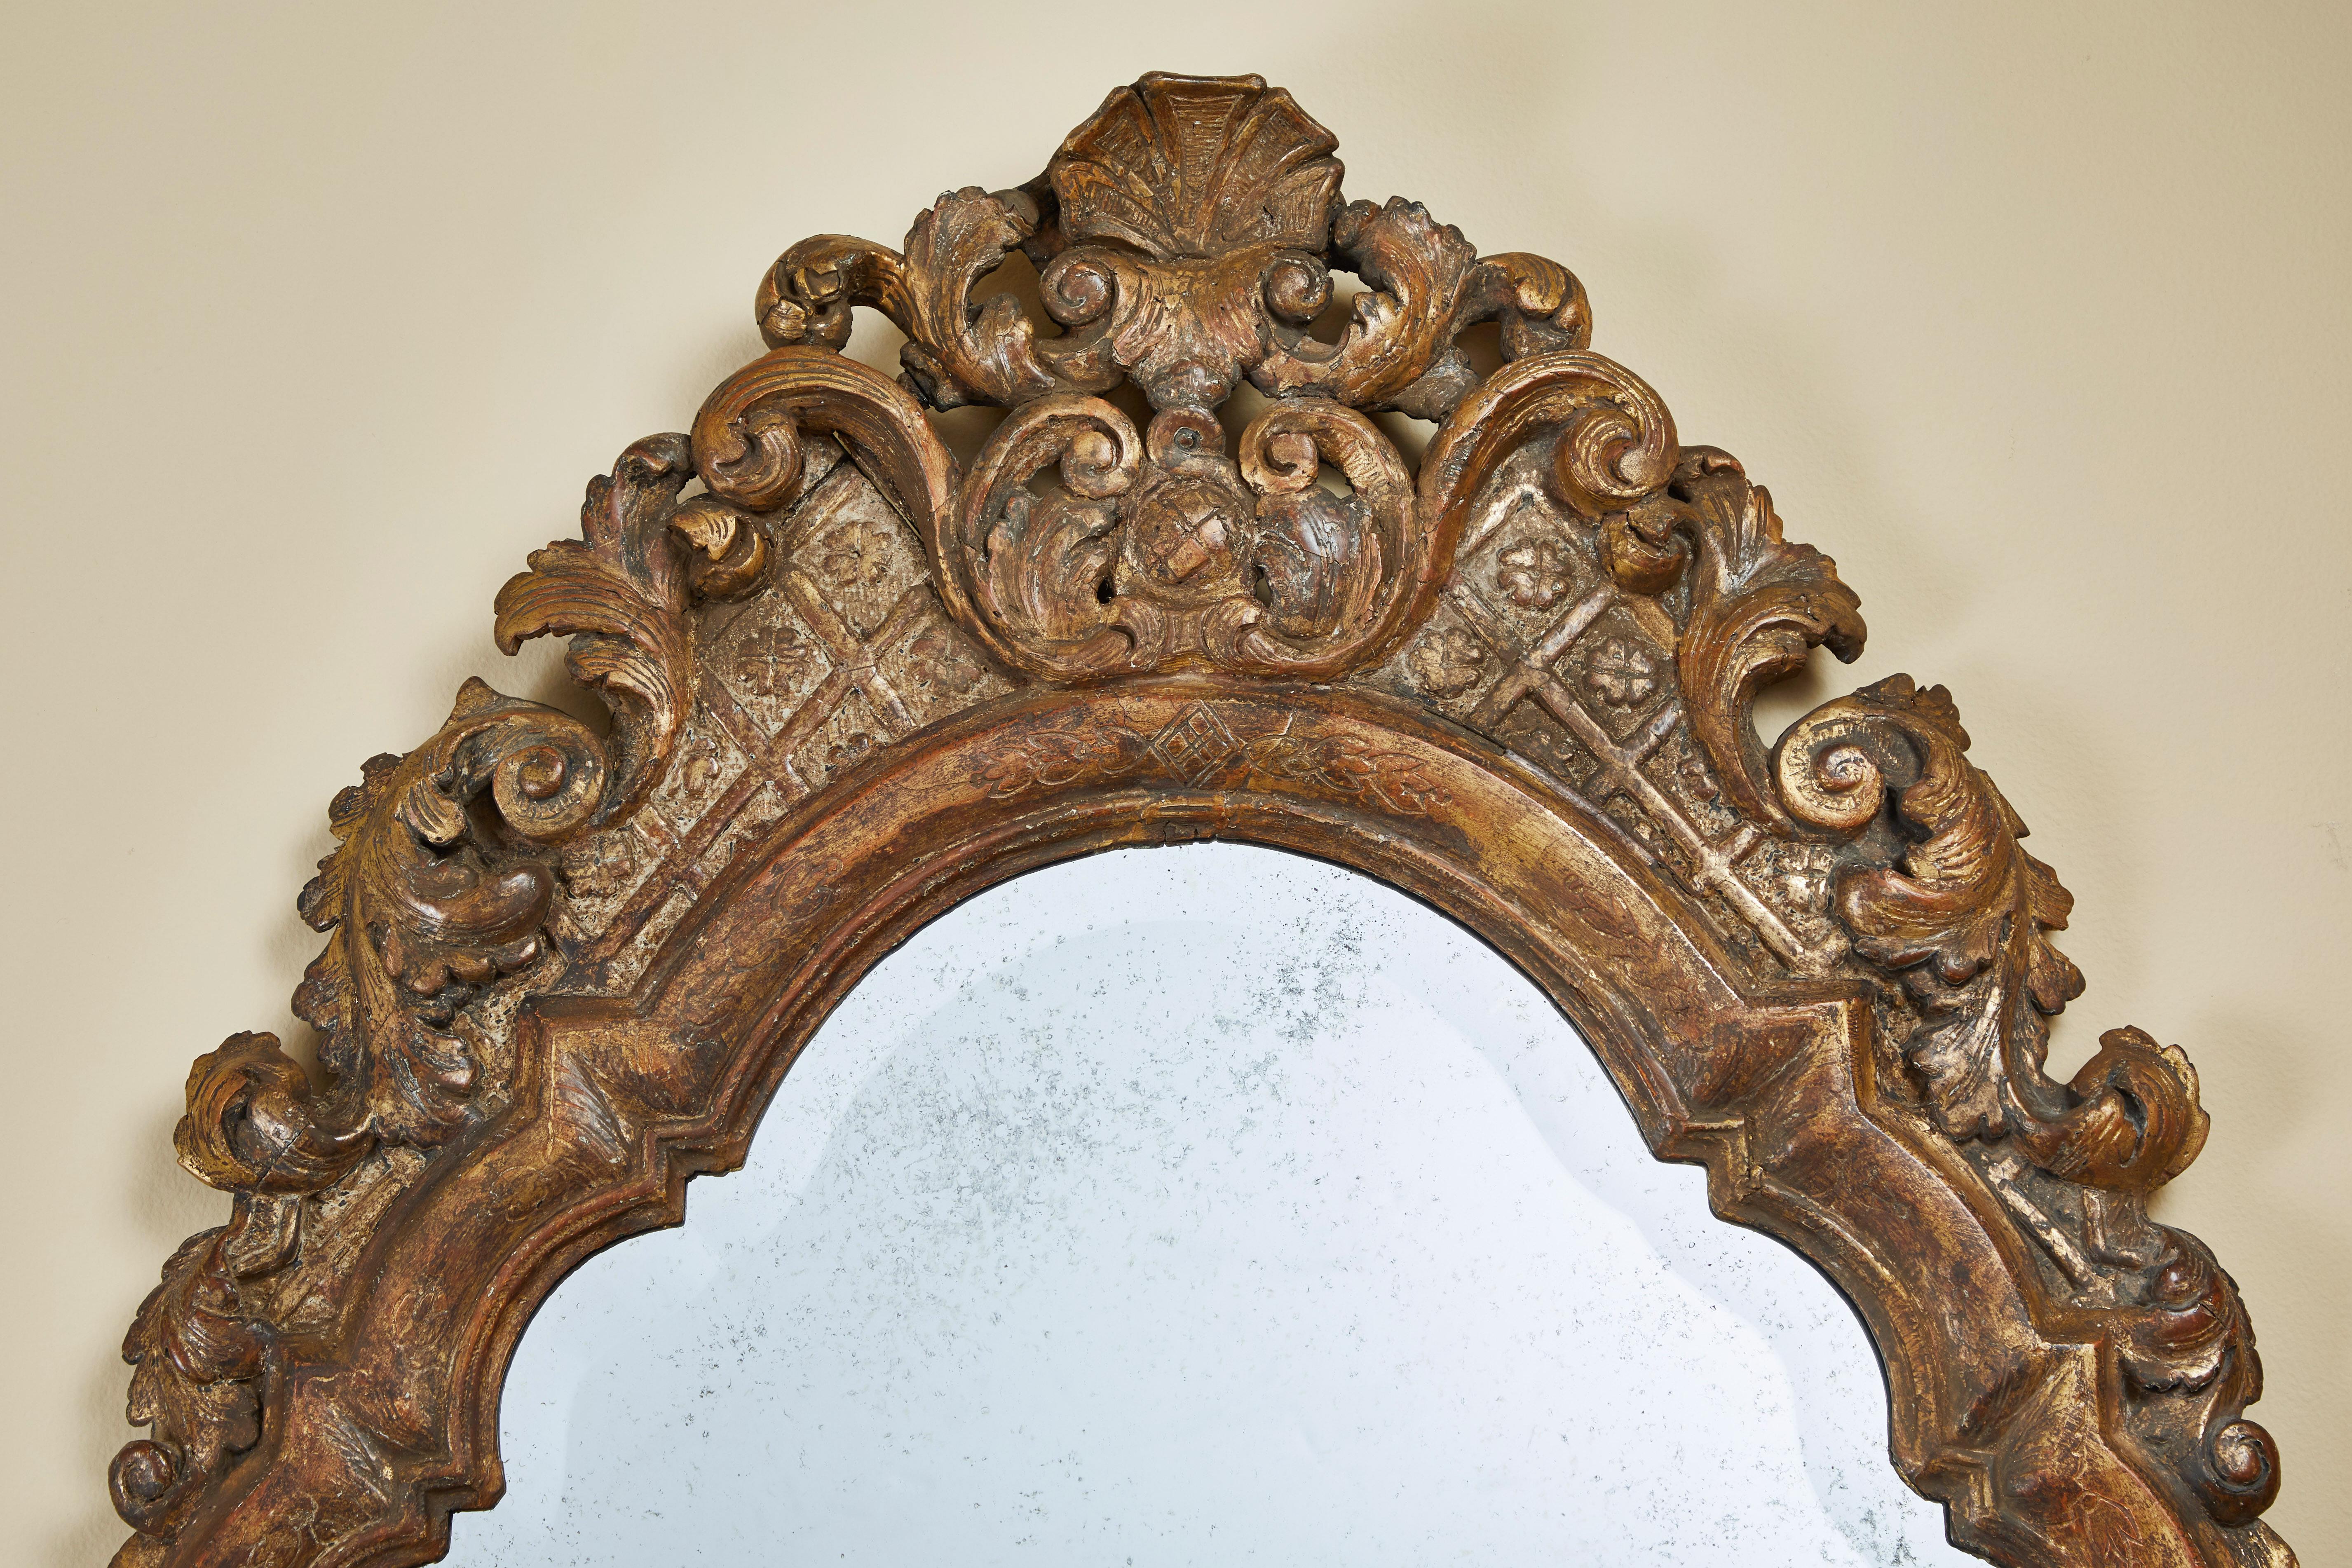 Unique and elegant French mirror with its original patina.
This mirror is hand-carved and gilded.
The glass has a light antique finish and is bevelled.